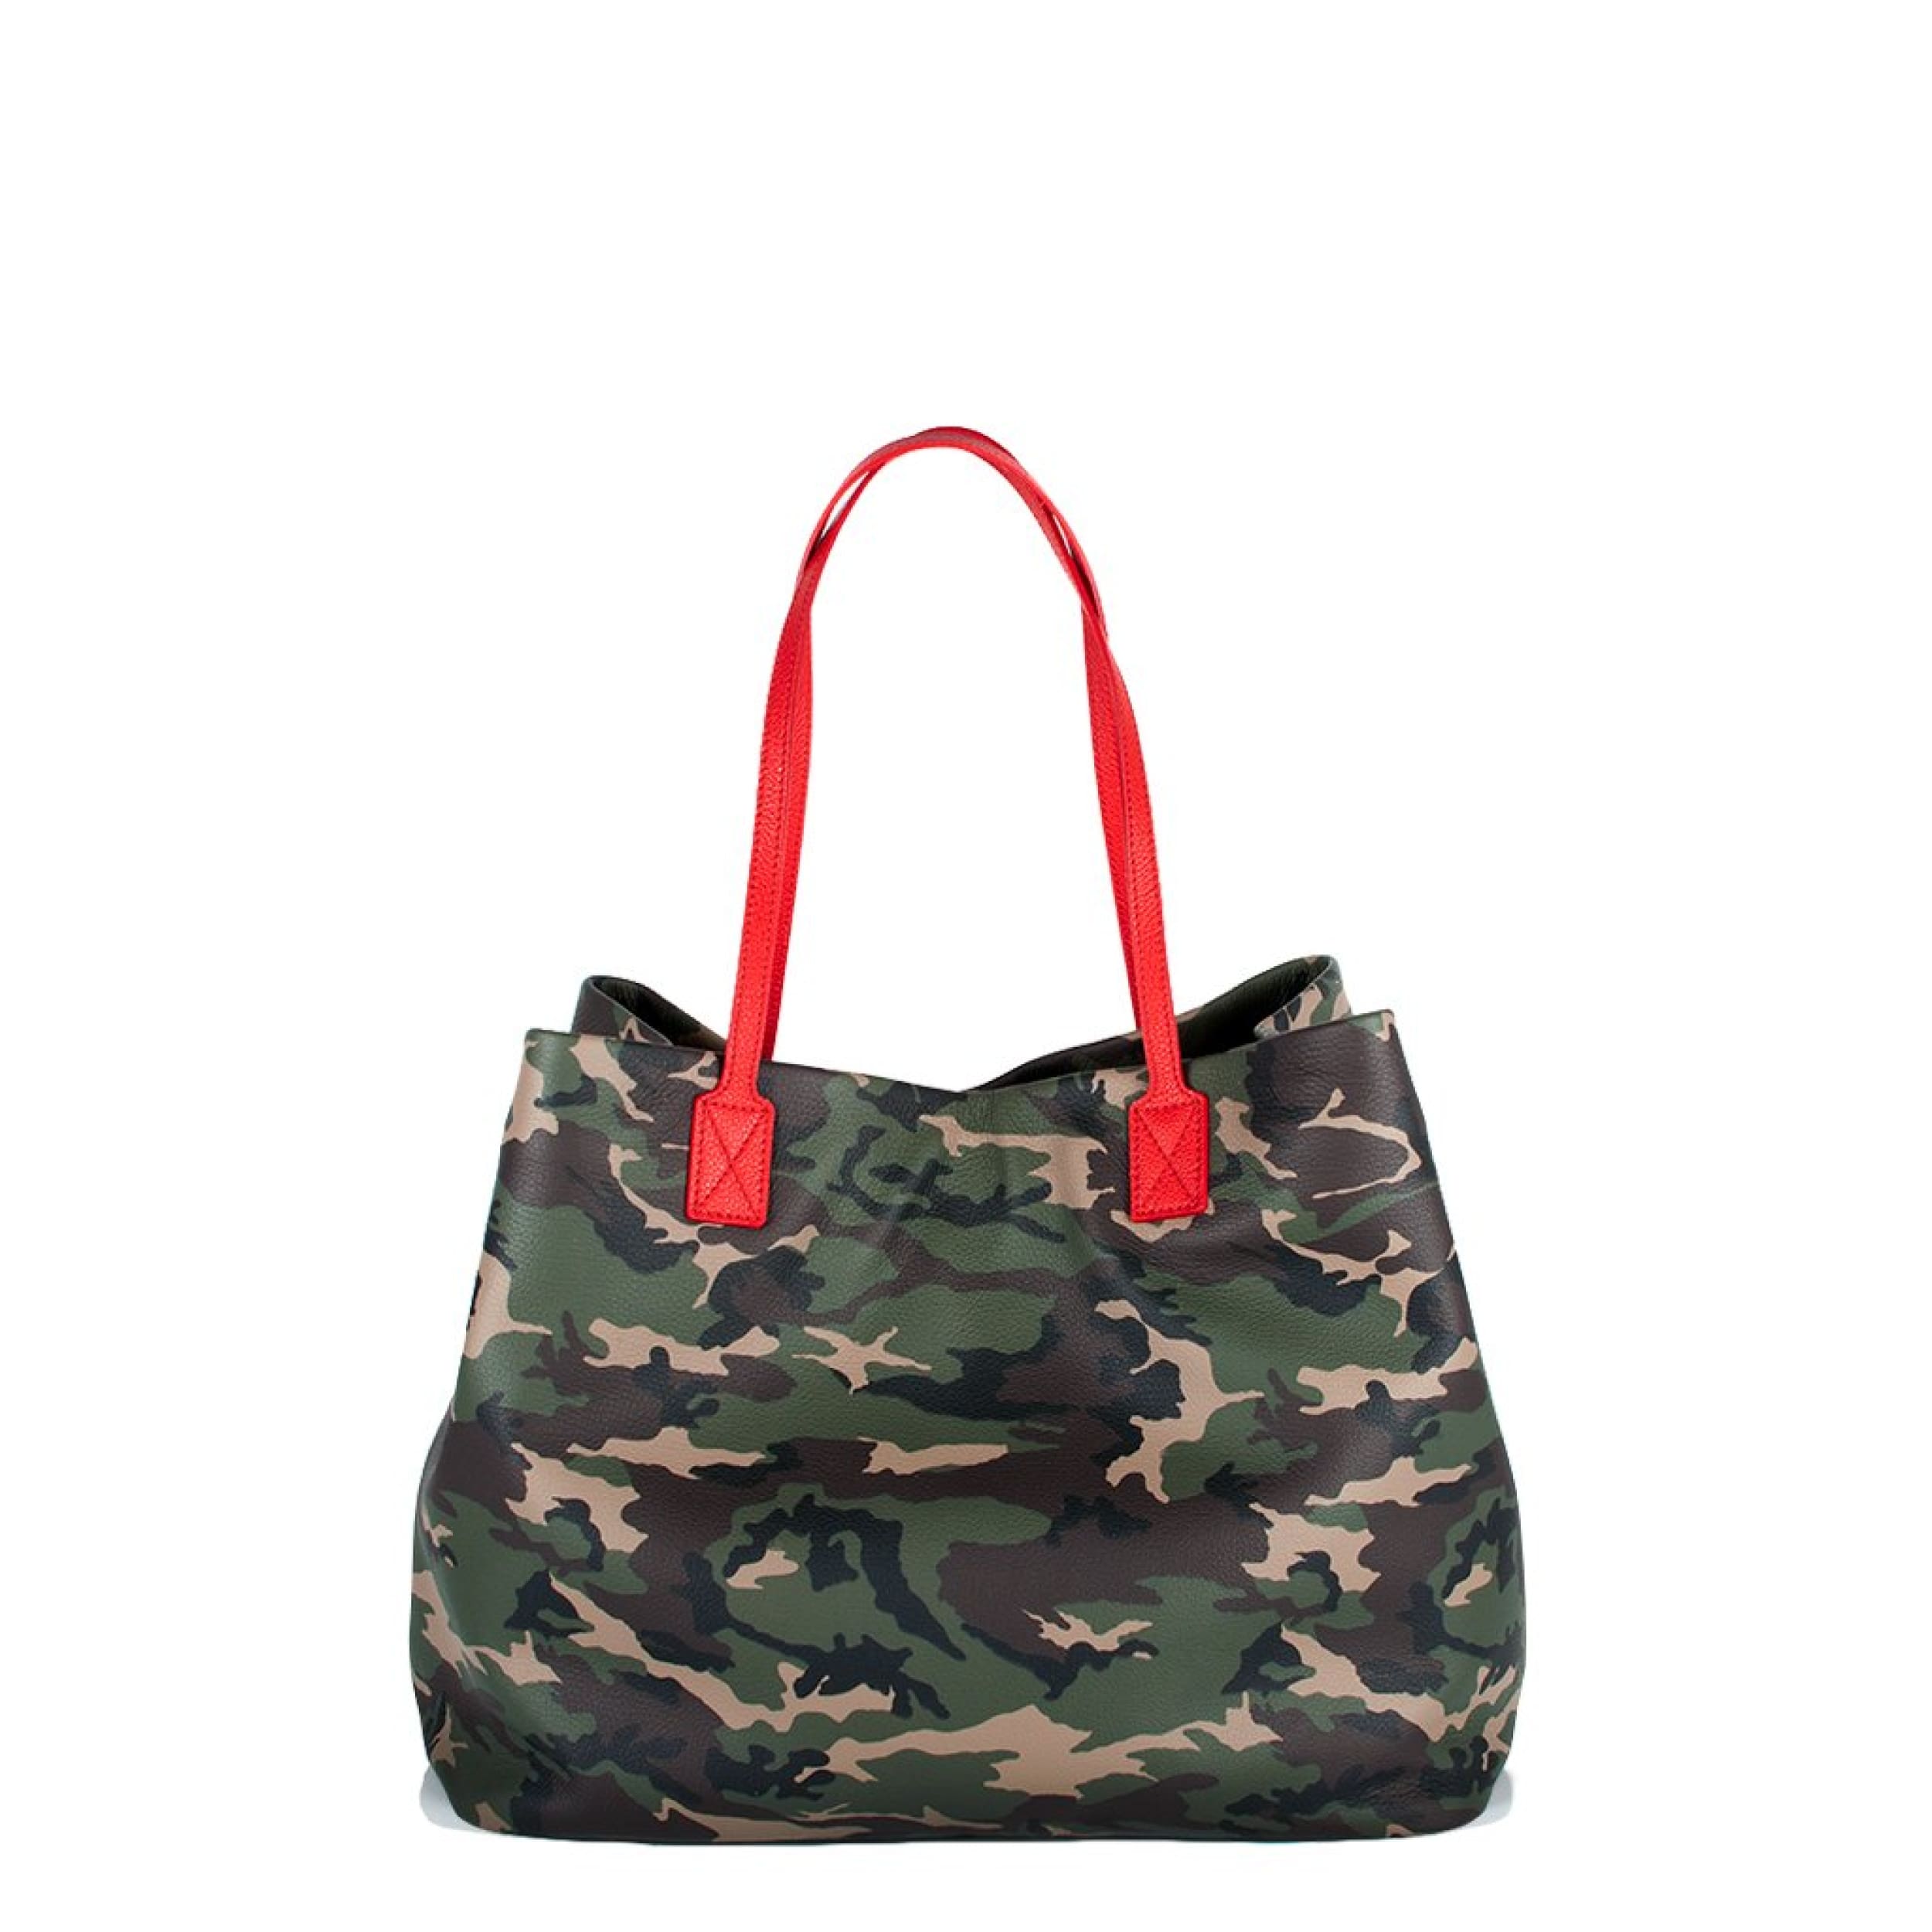 Alex New York Carry All Tote